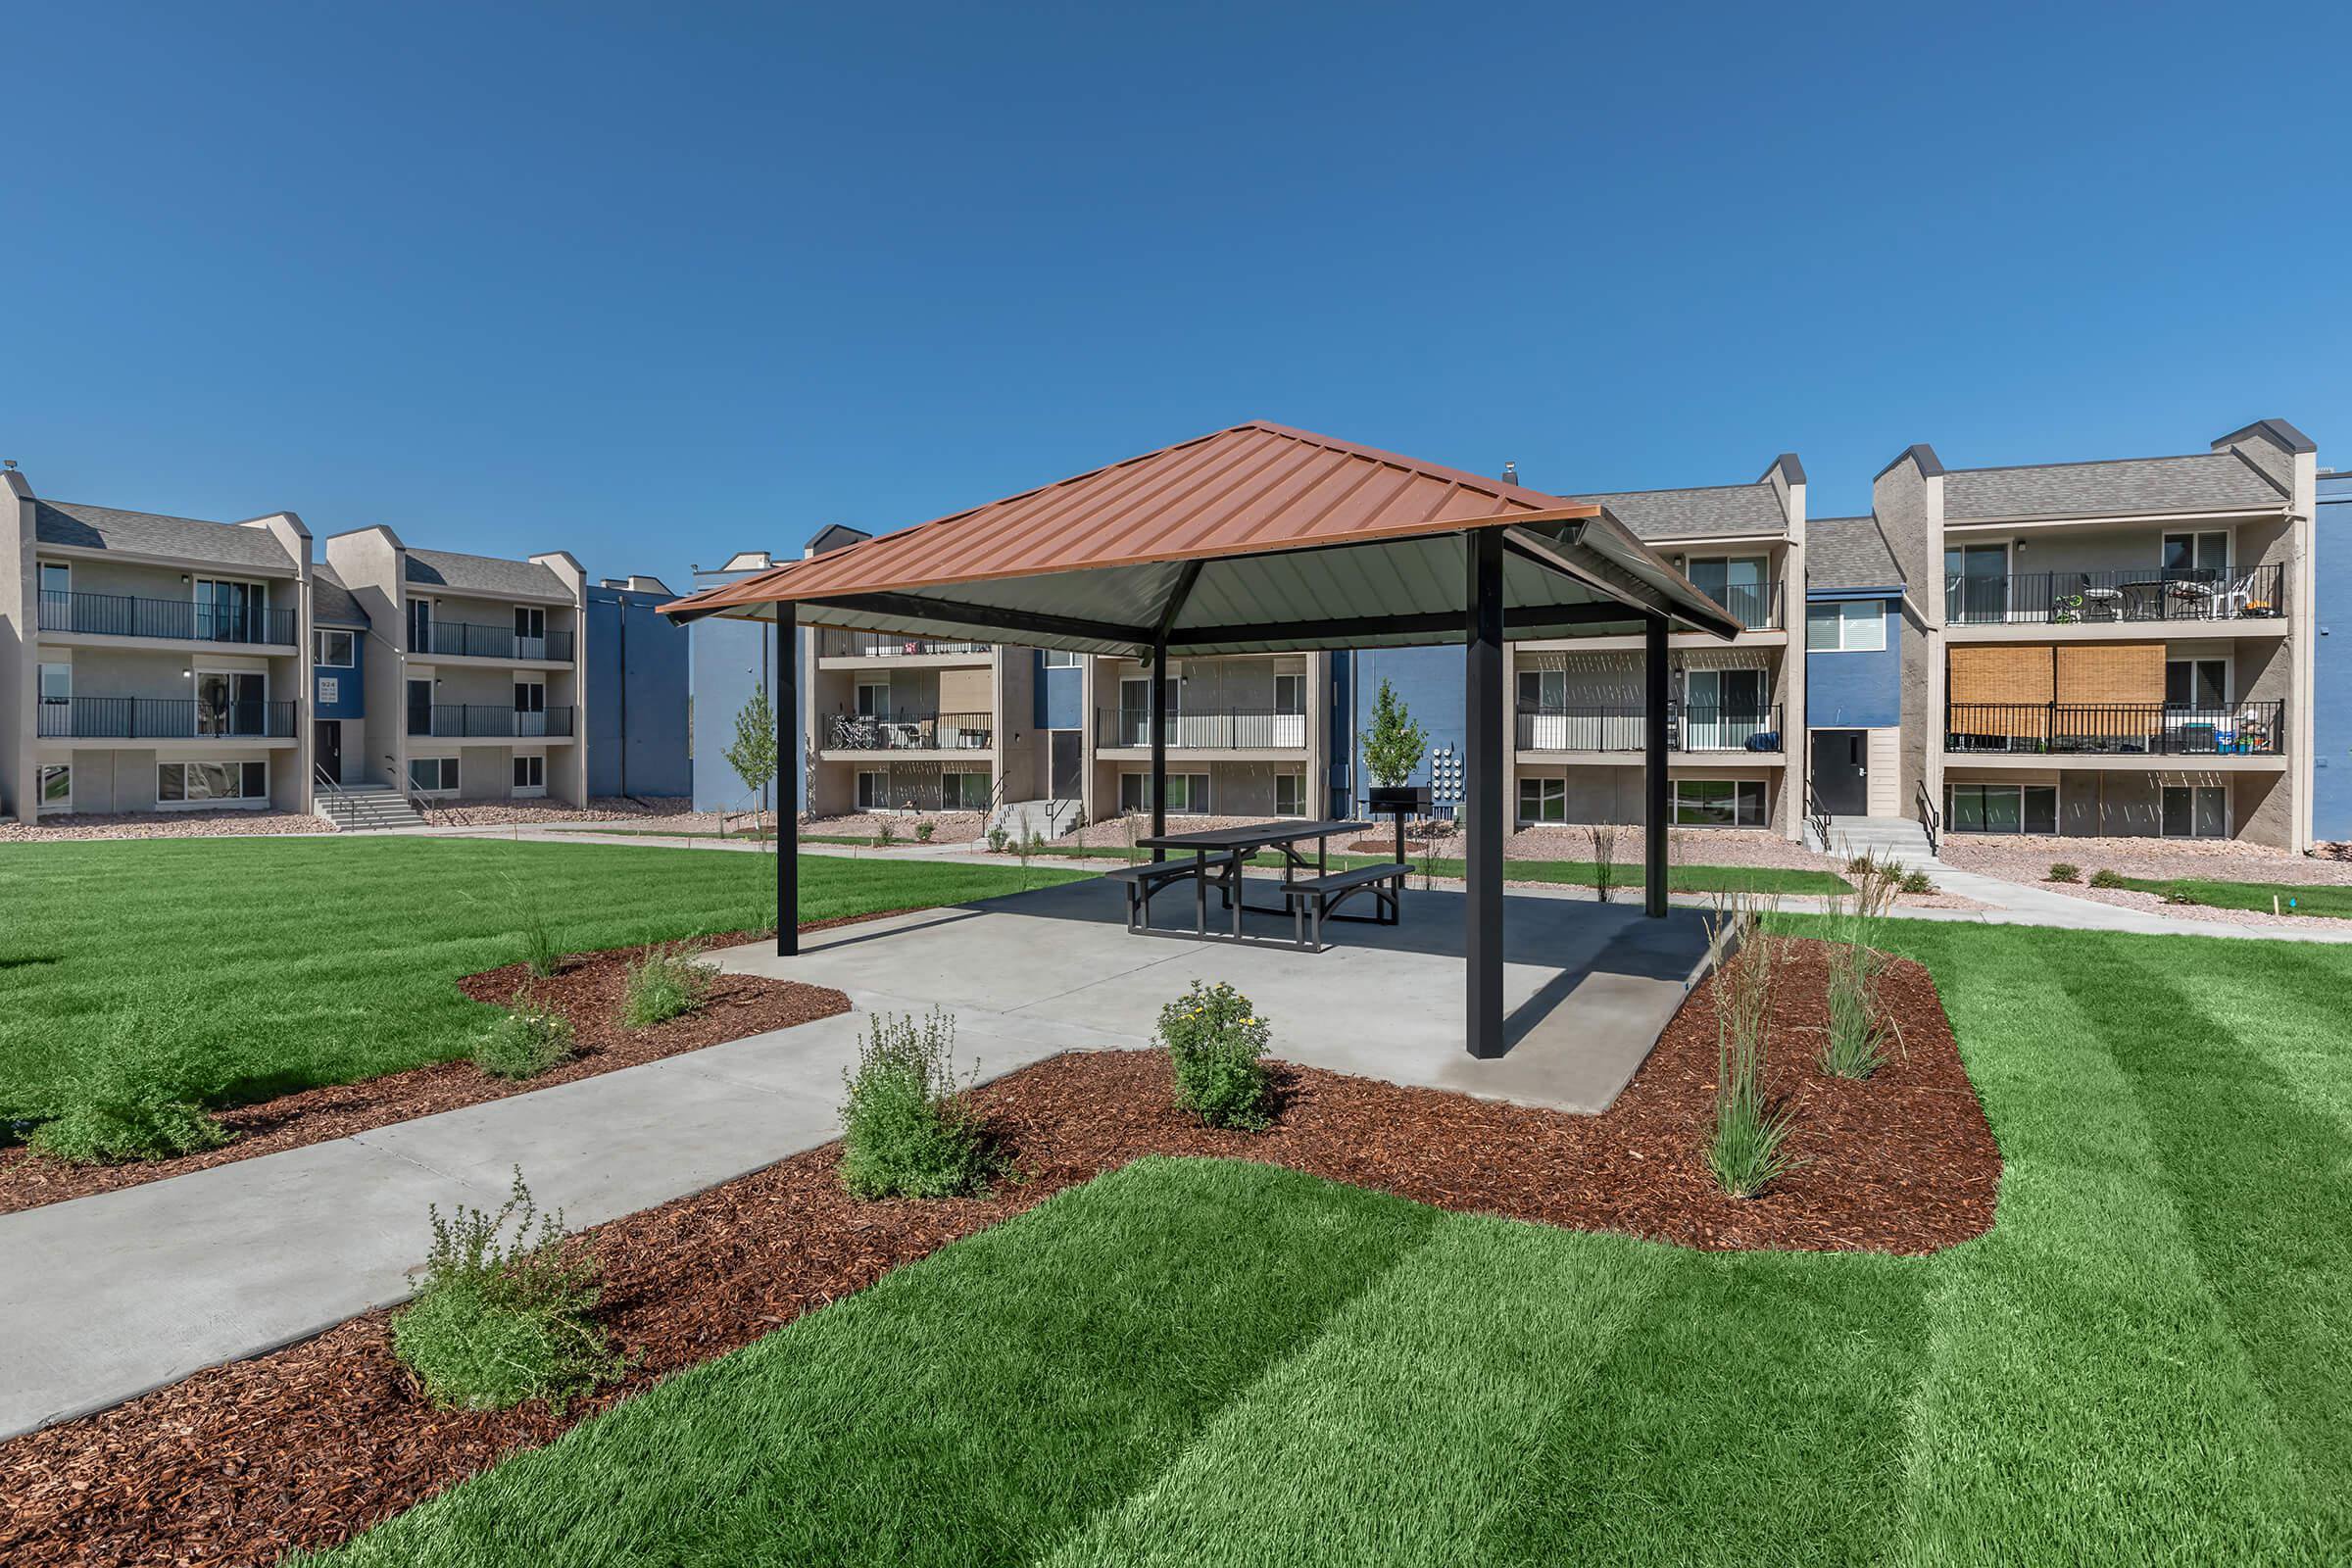 Pergola with outdoor dining and charcoal grill at Parc at Prairie Grass, located in Colorado Springs, CO